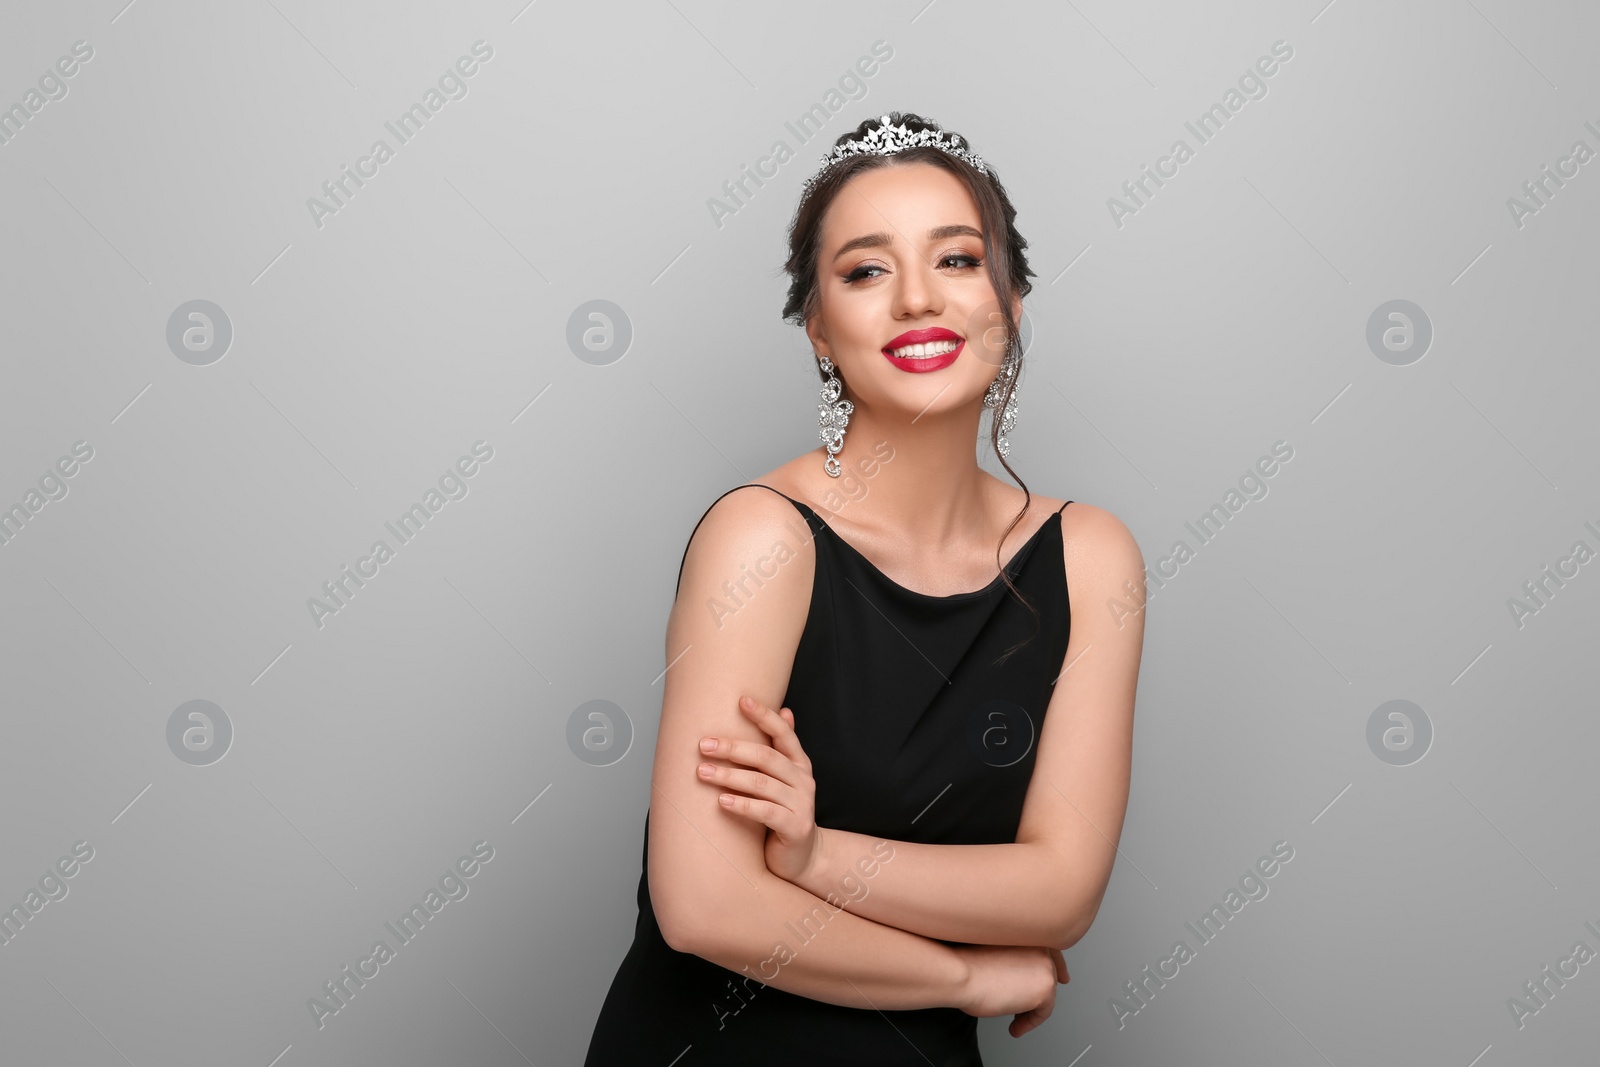 Photo of Beautiful young woman wearing luxurious tiara on light grey background, space for text